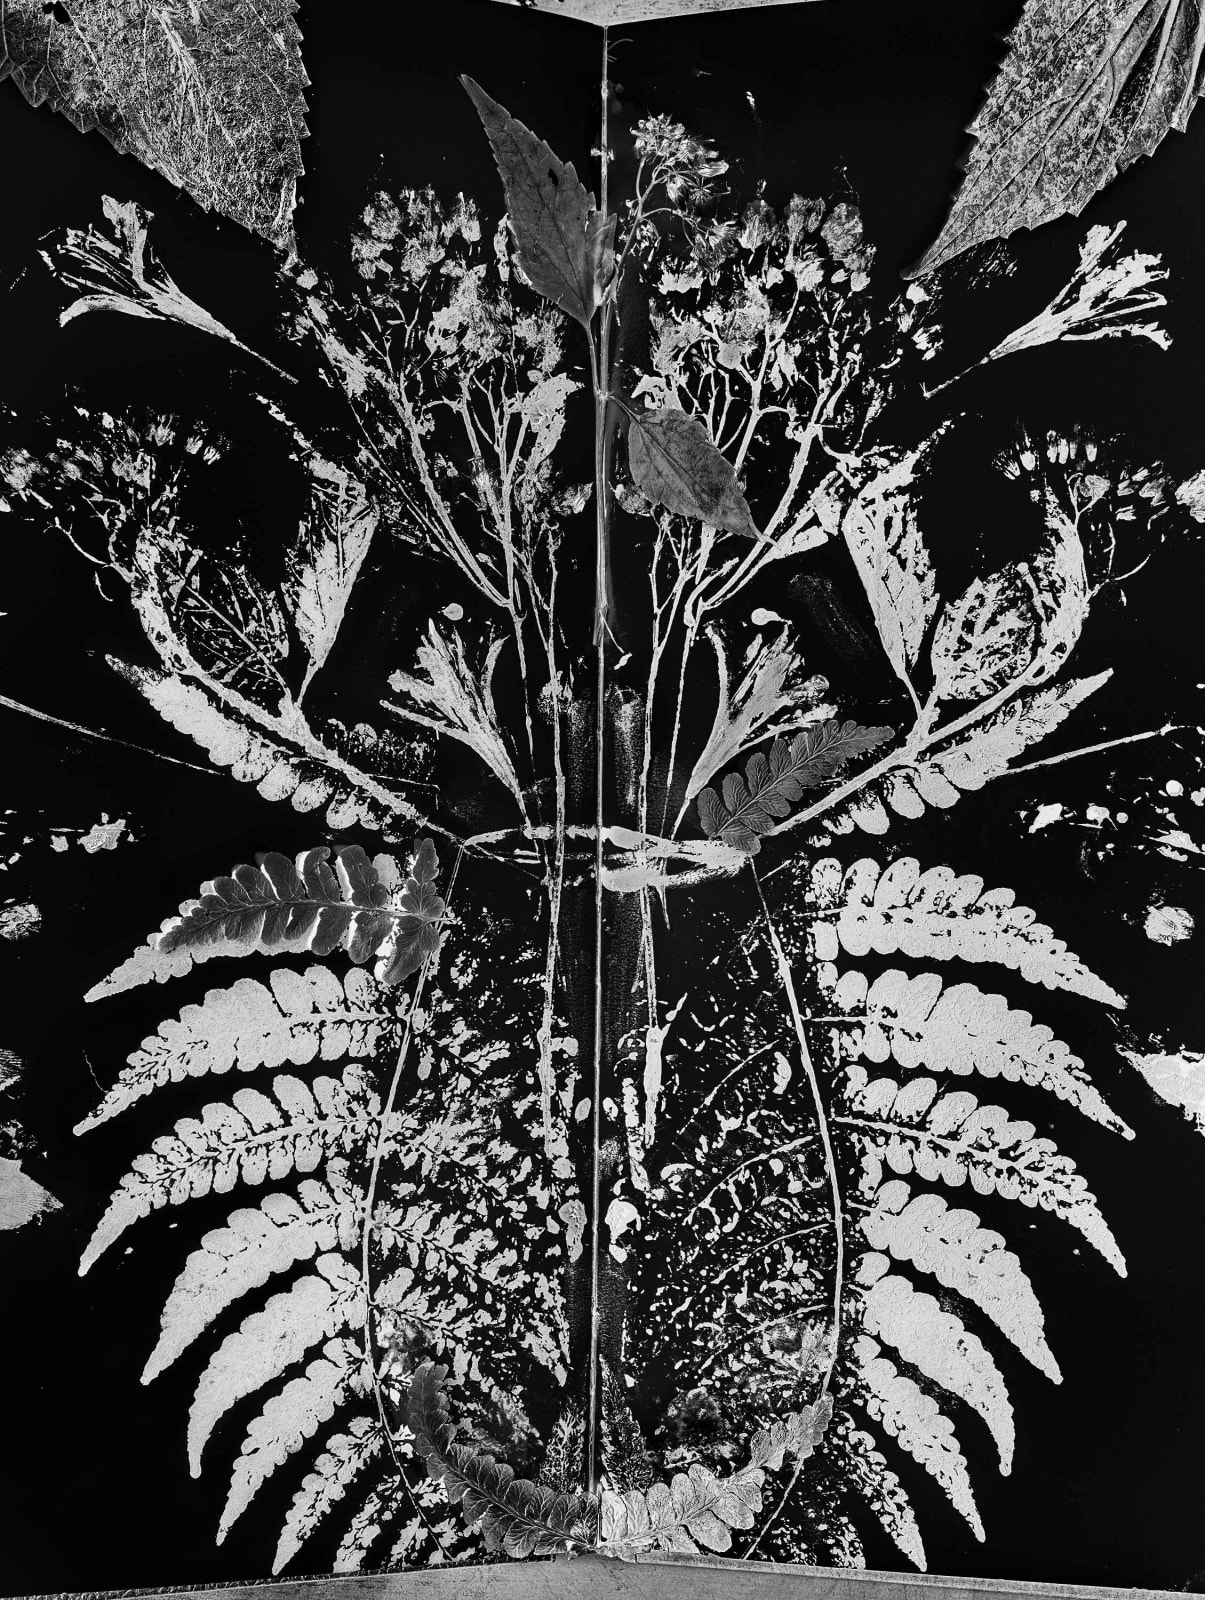 Abelardo Morell Flowers for Lisa #71 After Anna Atkins black and white botanical pressing of inked leaves in a book to make a symmetrical impression